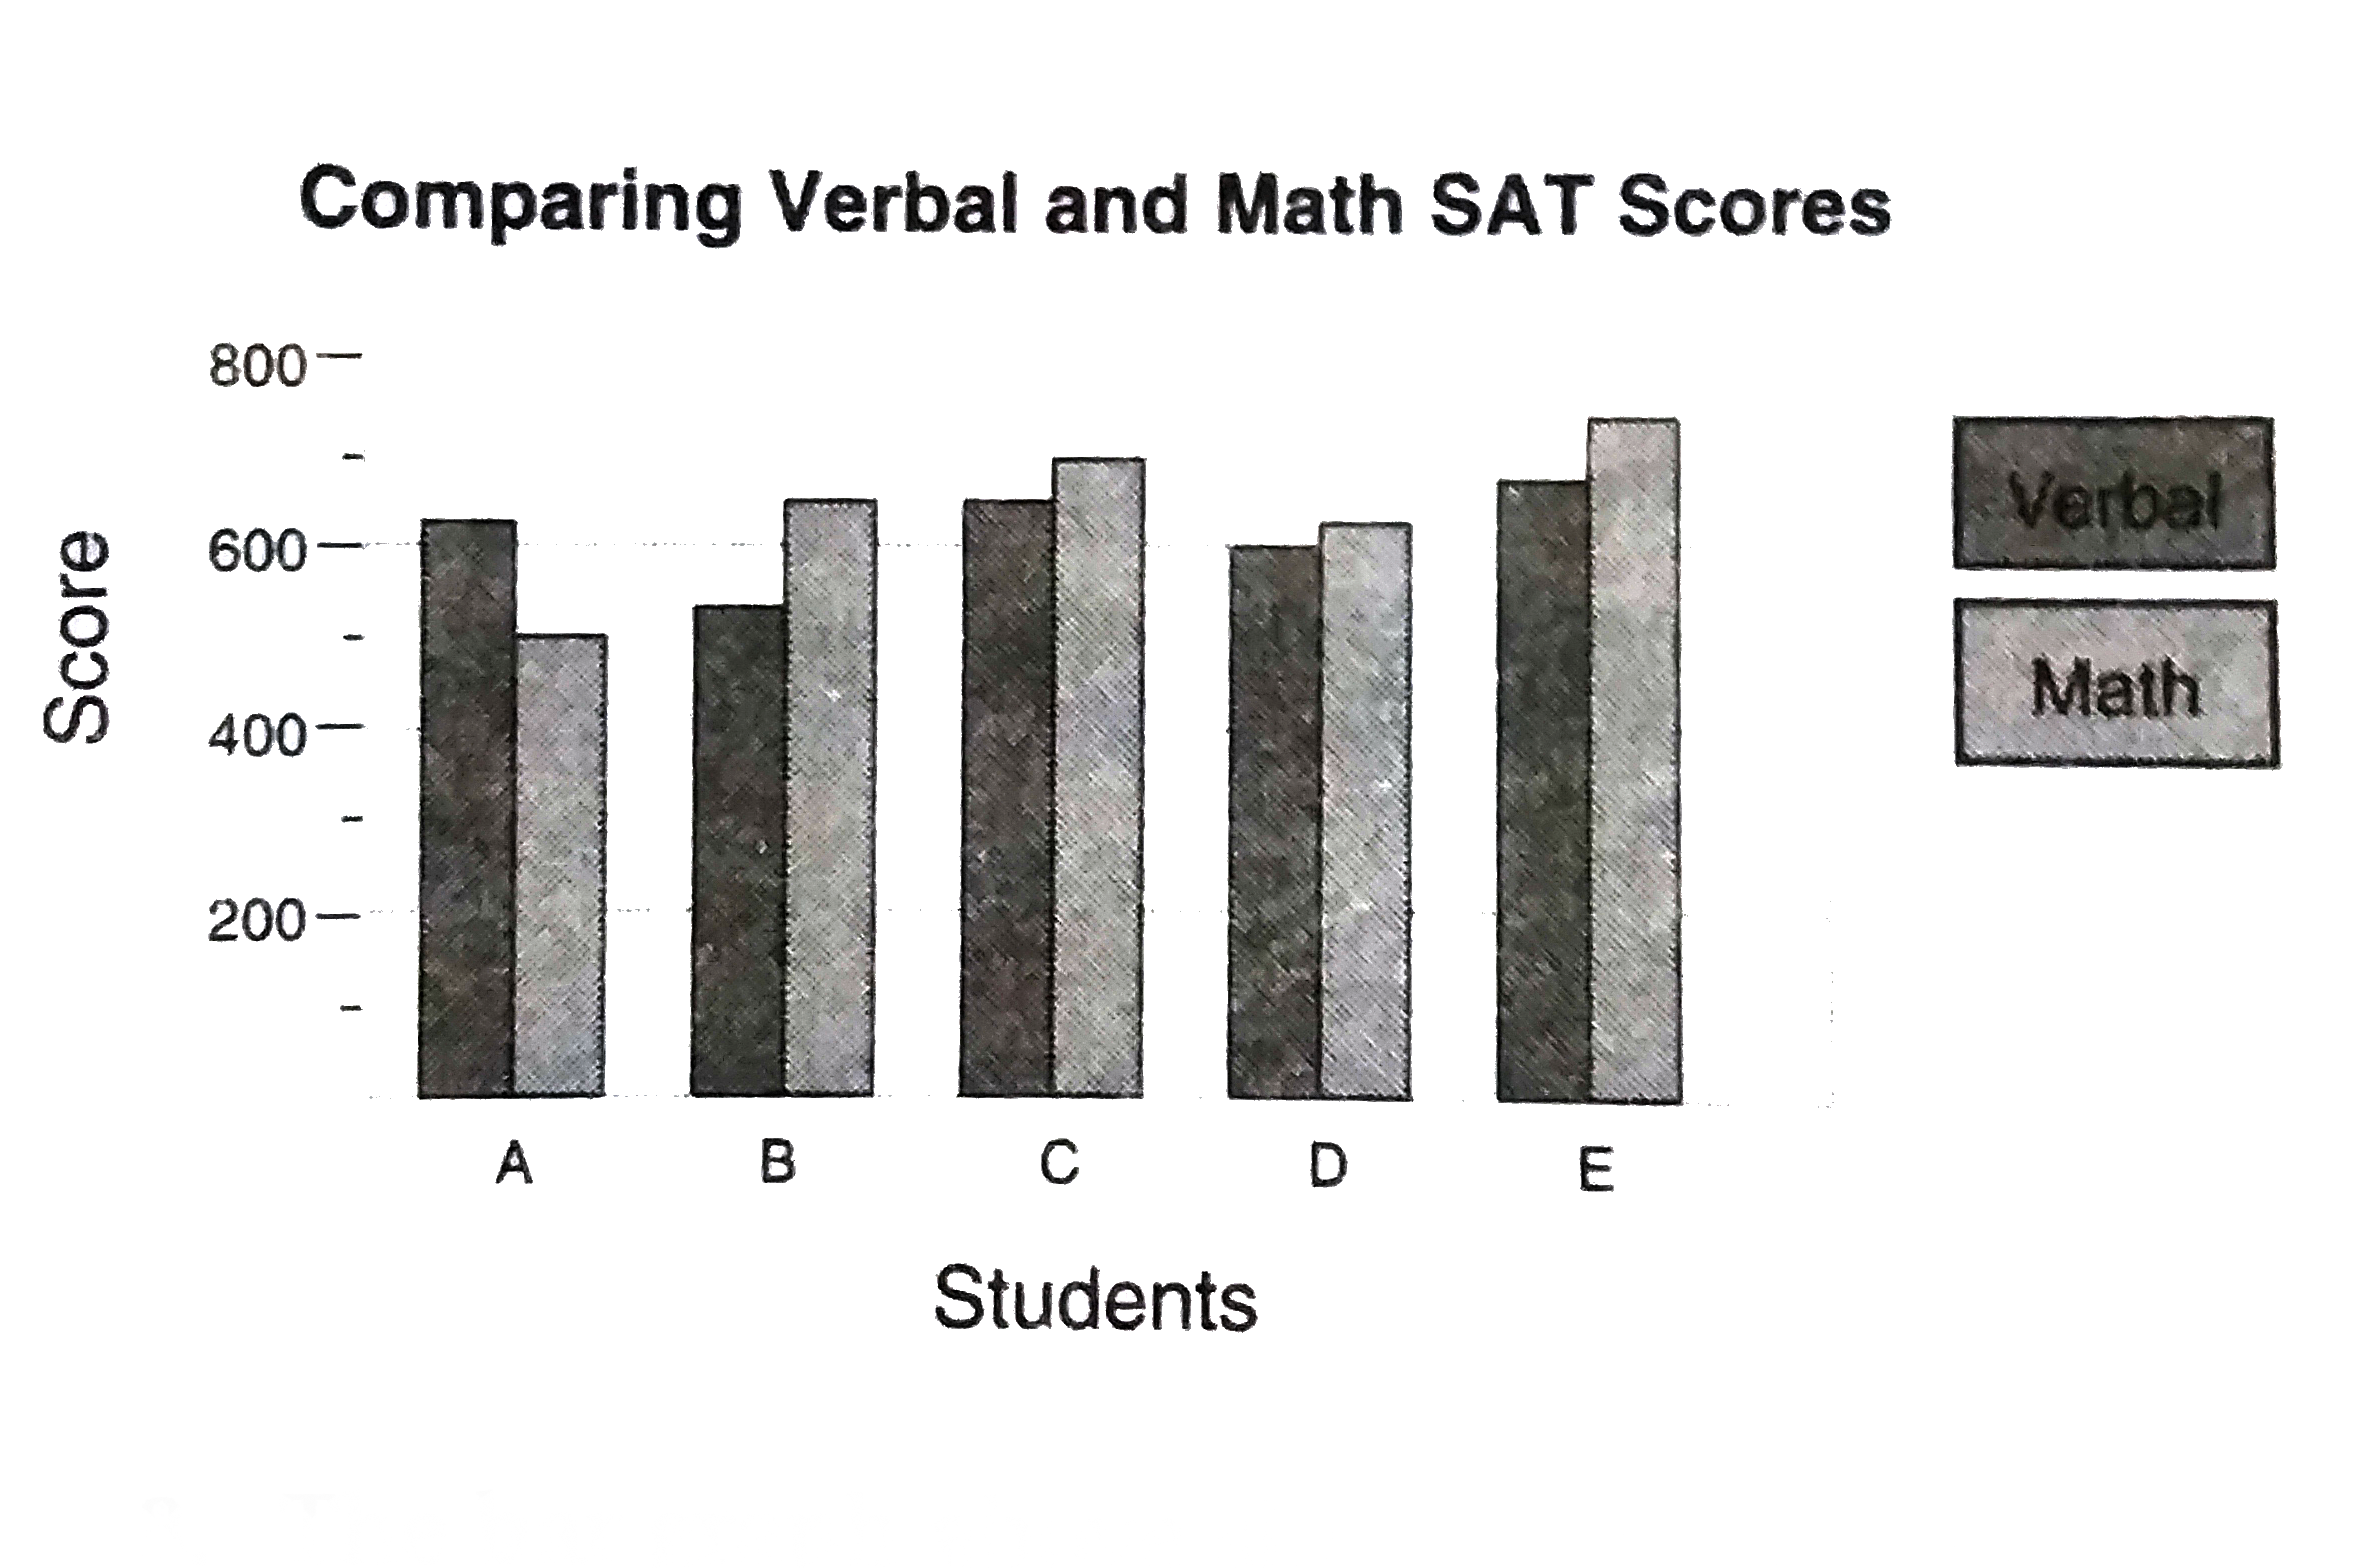 The bar graph above shows the verbal and math SAT scores for five students labeled A through E. If a scatterplot of the data in the bar graph is made such that the math SAT score for each student is plotted along the x-axis and their verbal SAT score is plotted along the y-axis, how many of the data points would lie above the line y=x?